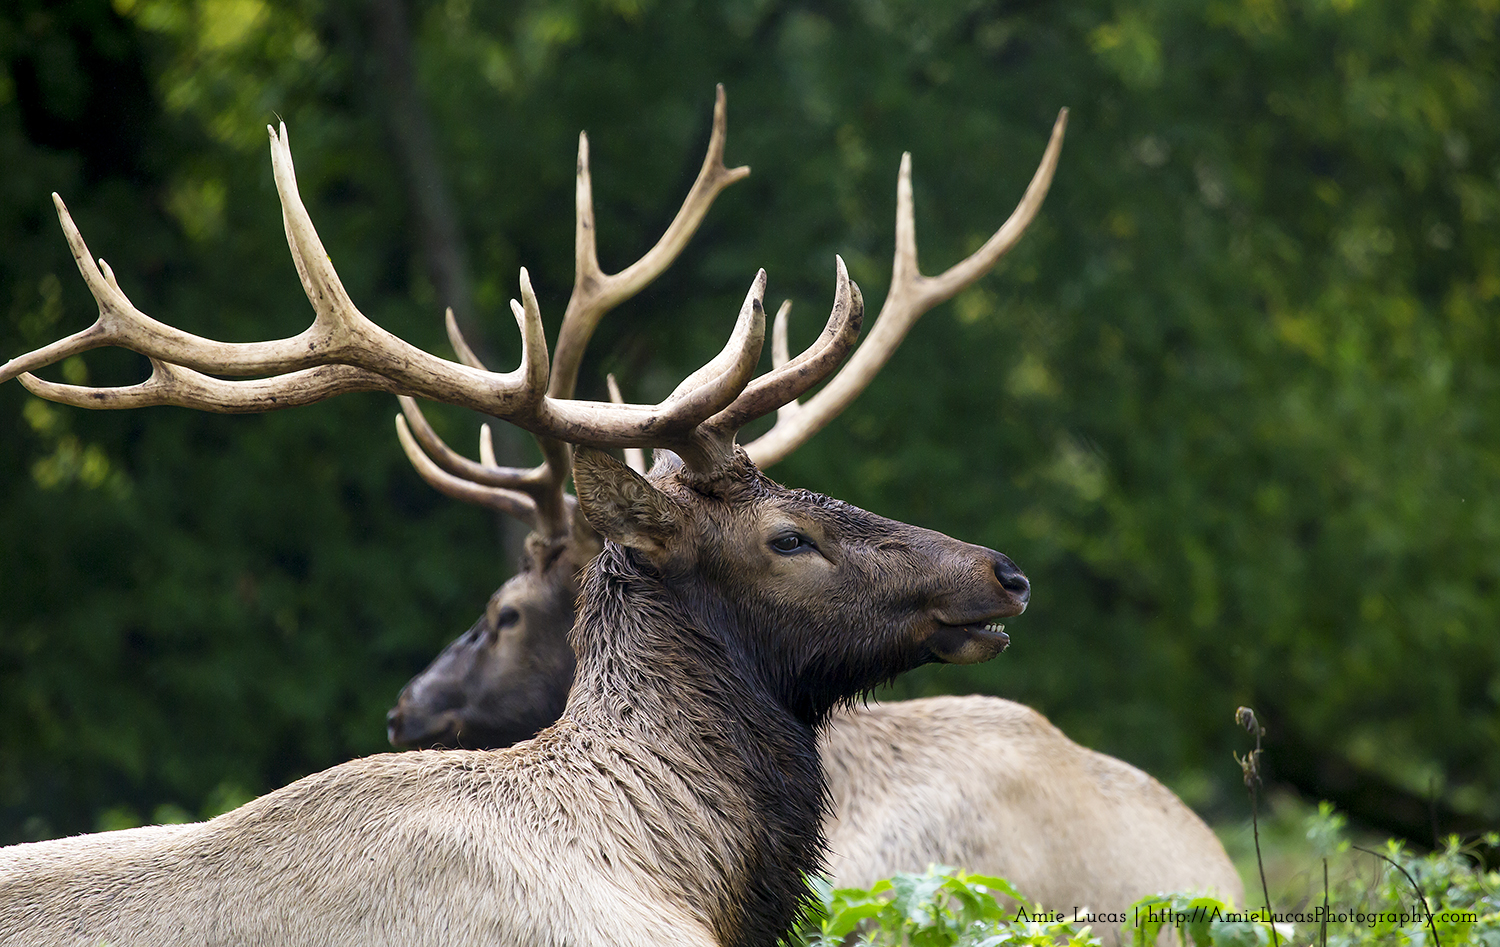 Experience the Elk at Gaylord's City Park - Camp. Hike. Explore